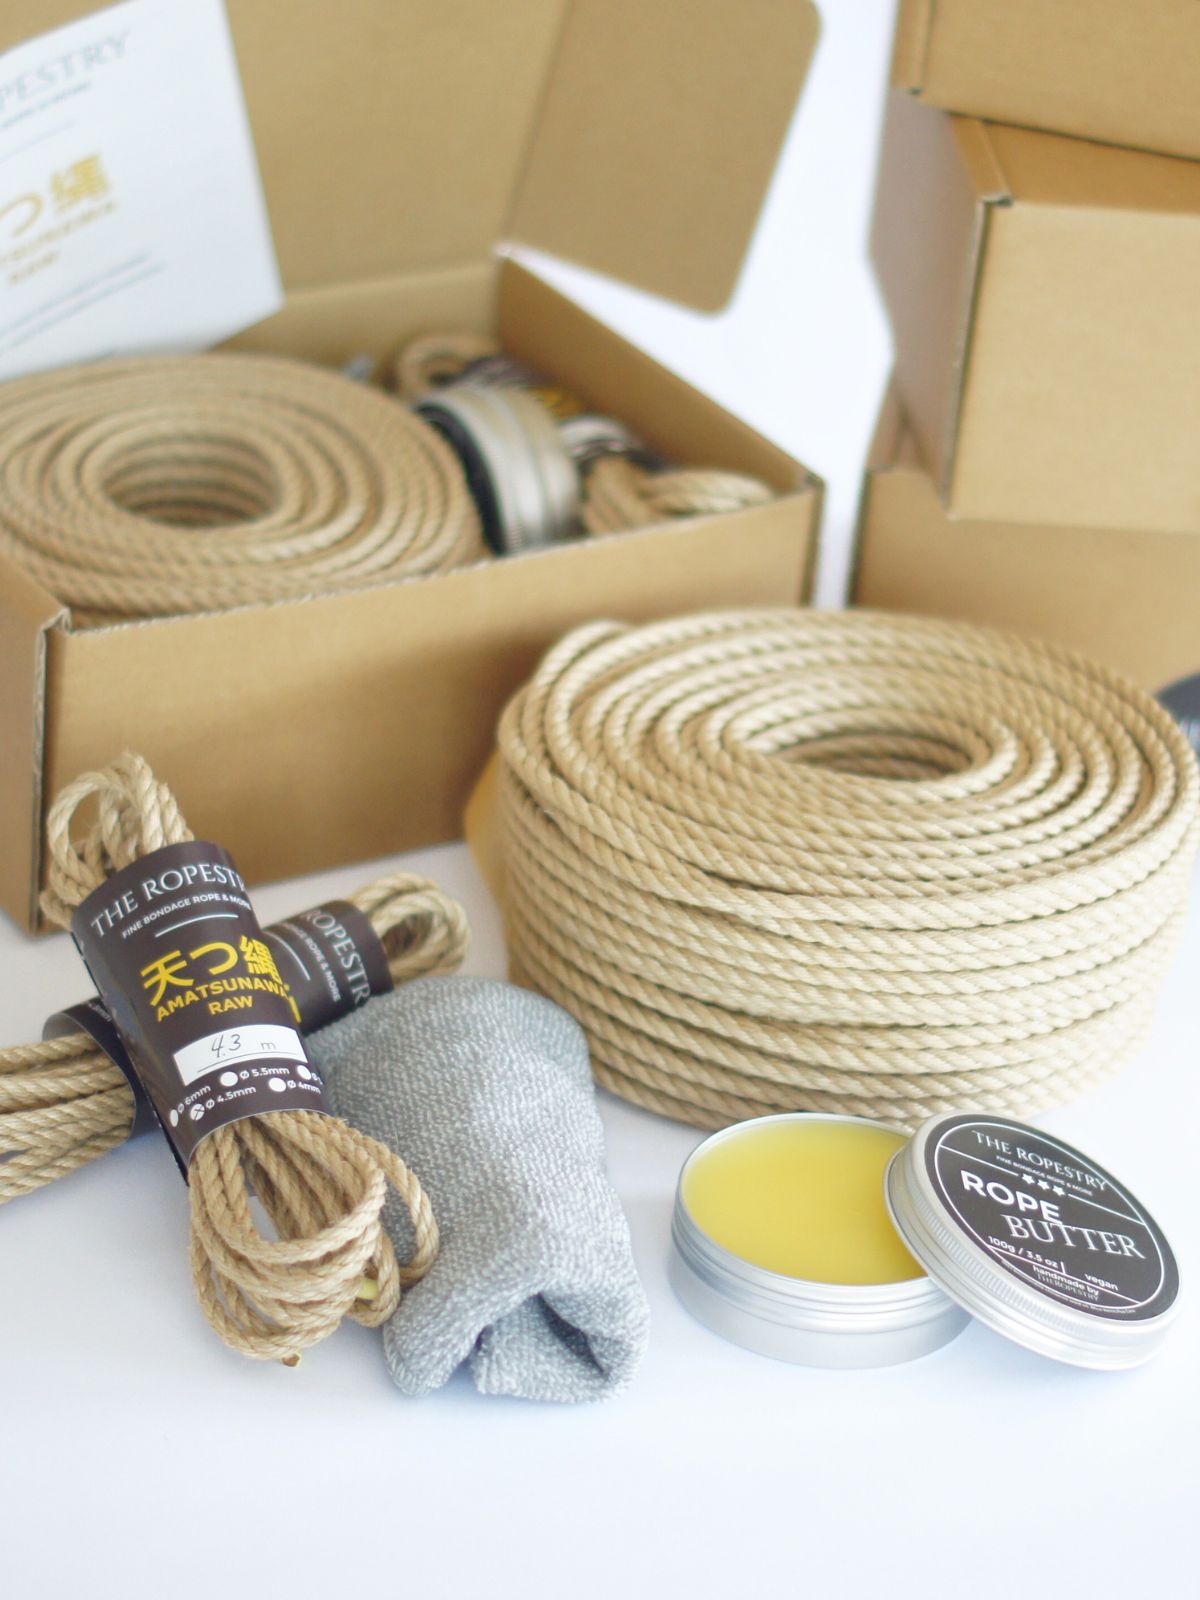 DIY RAW BOX - 50 m raw rope, 2x 4.3 m thin ropes, rope butter, storage box, instruction booklet and FREE microfibre cloth